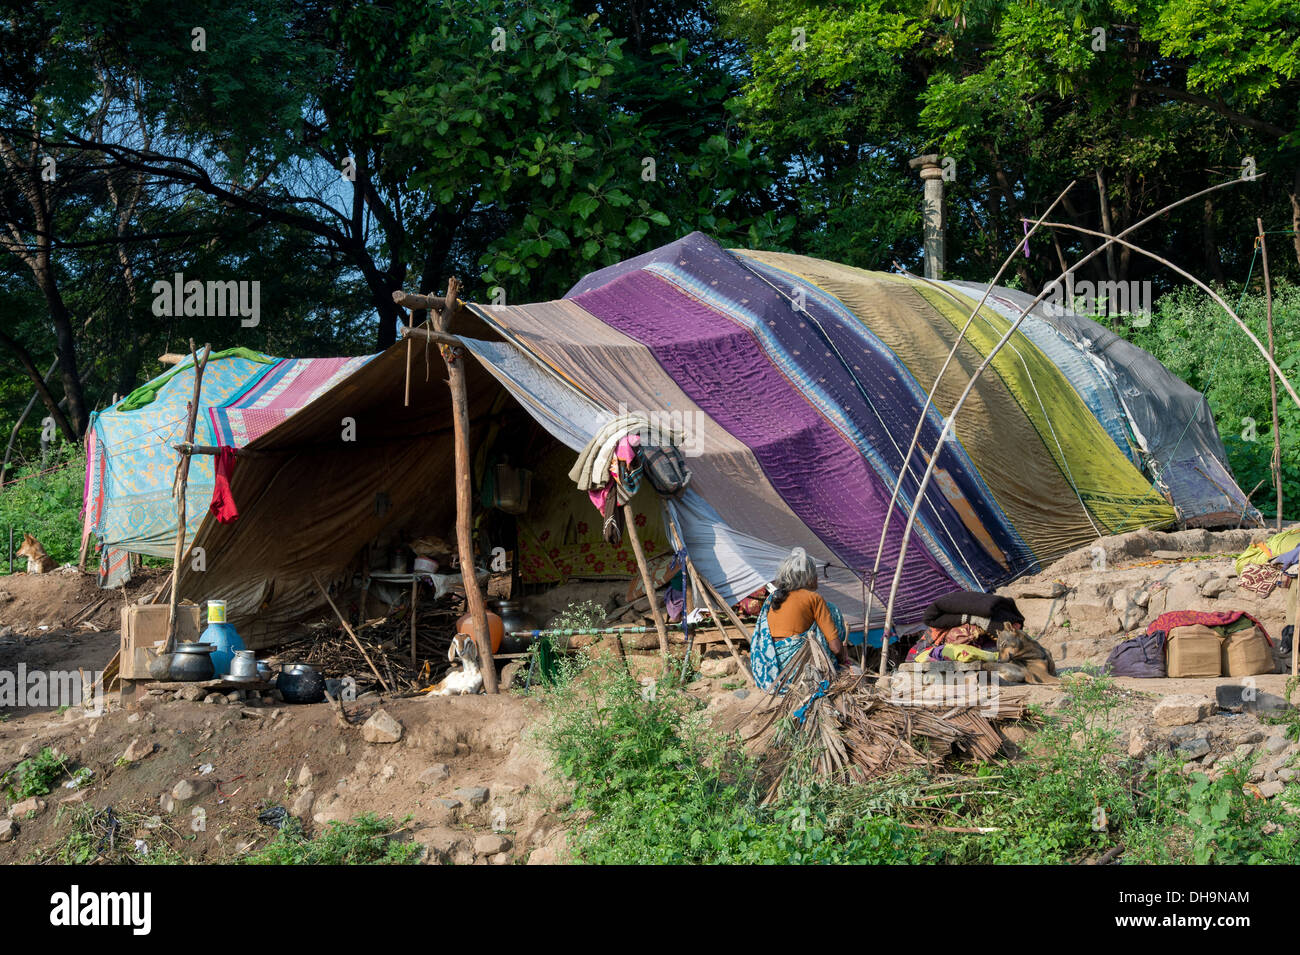 Lower caste Indian woman sitting outside her bender / tent / shelter. Andhra Pradesh, India. Stock Photo